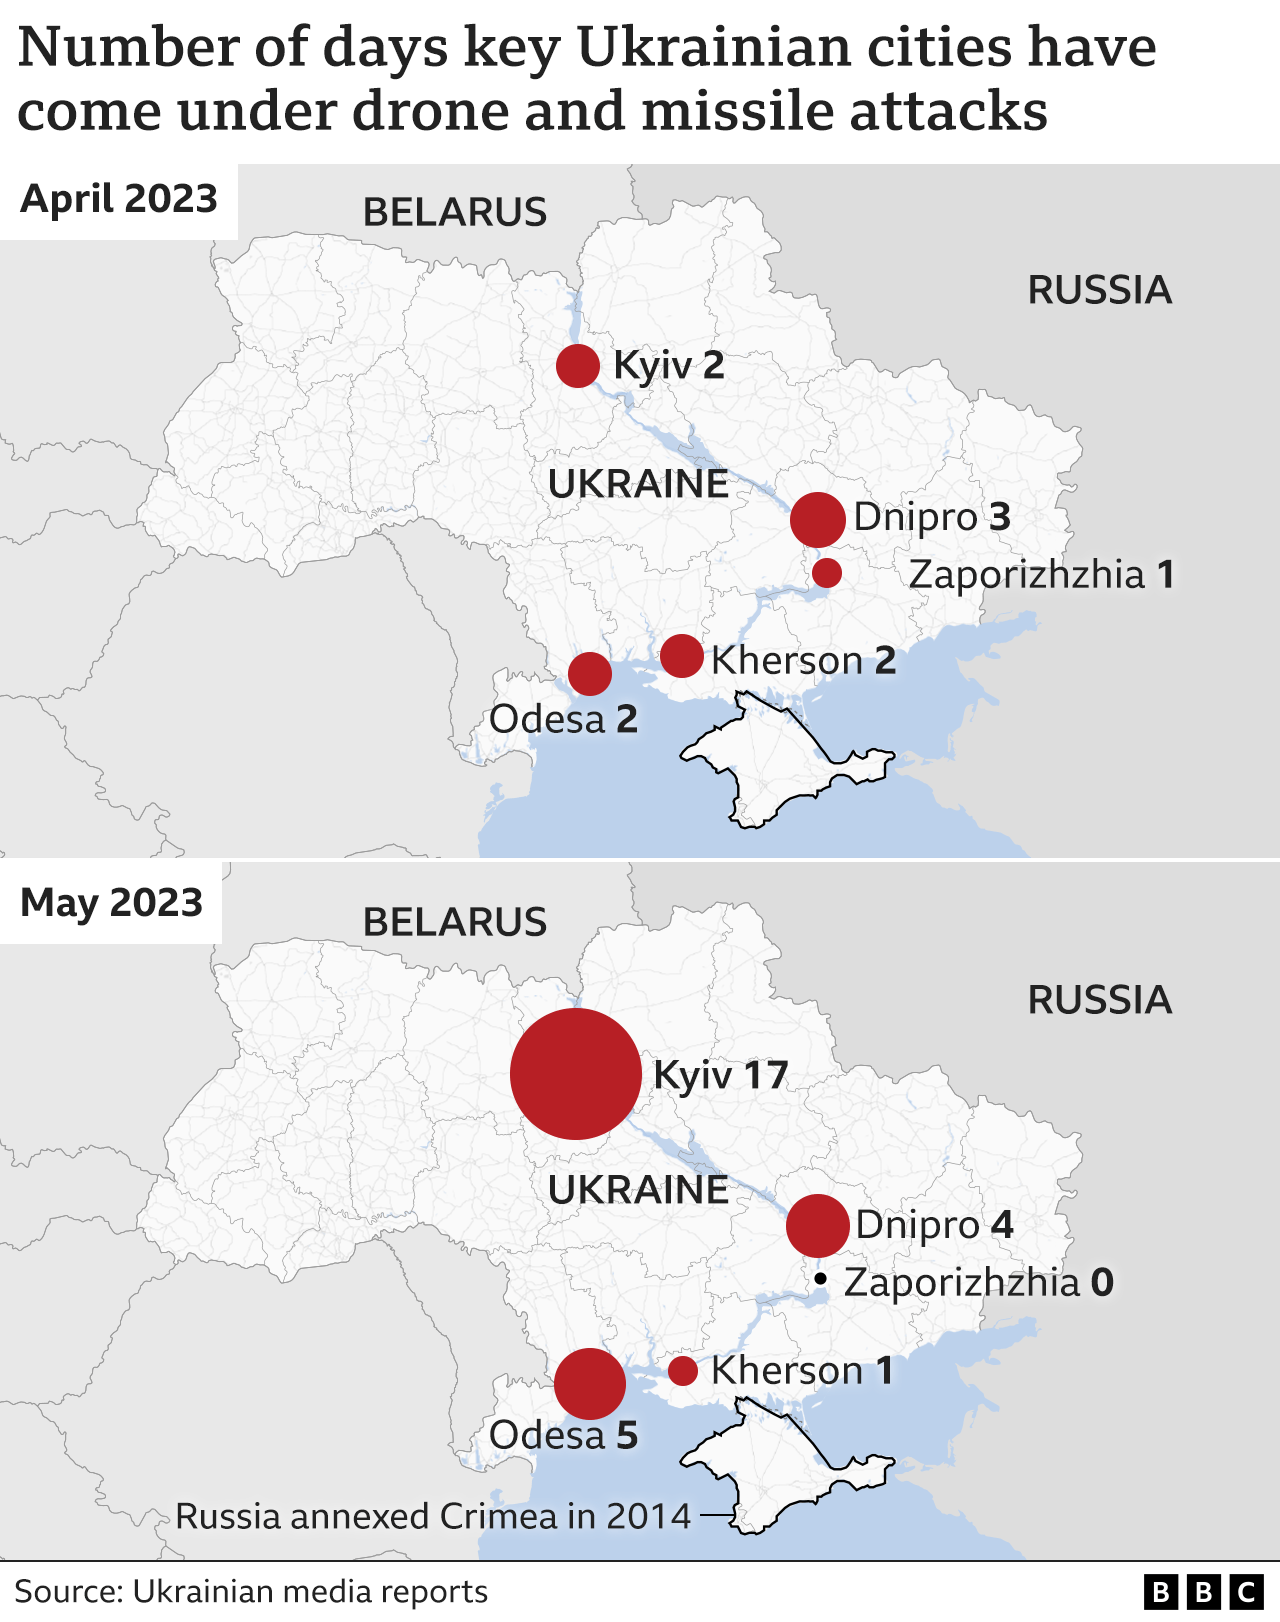 Two maps of Ukraine showing the number of days in which there have been reports of Russian missile and drone attacks on key Ukrainian cities over the course of April and May. Red circles of varying sizes are used in the city locations to represent the number of attacks. The maps show that attacks on Kyiv have increased sharply from a total of two in April to 17 in May. Dnipro and Odesa have seen smaller increases from three to four and two to five attacks respectively.